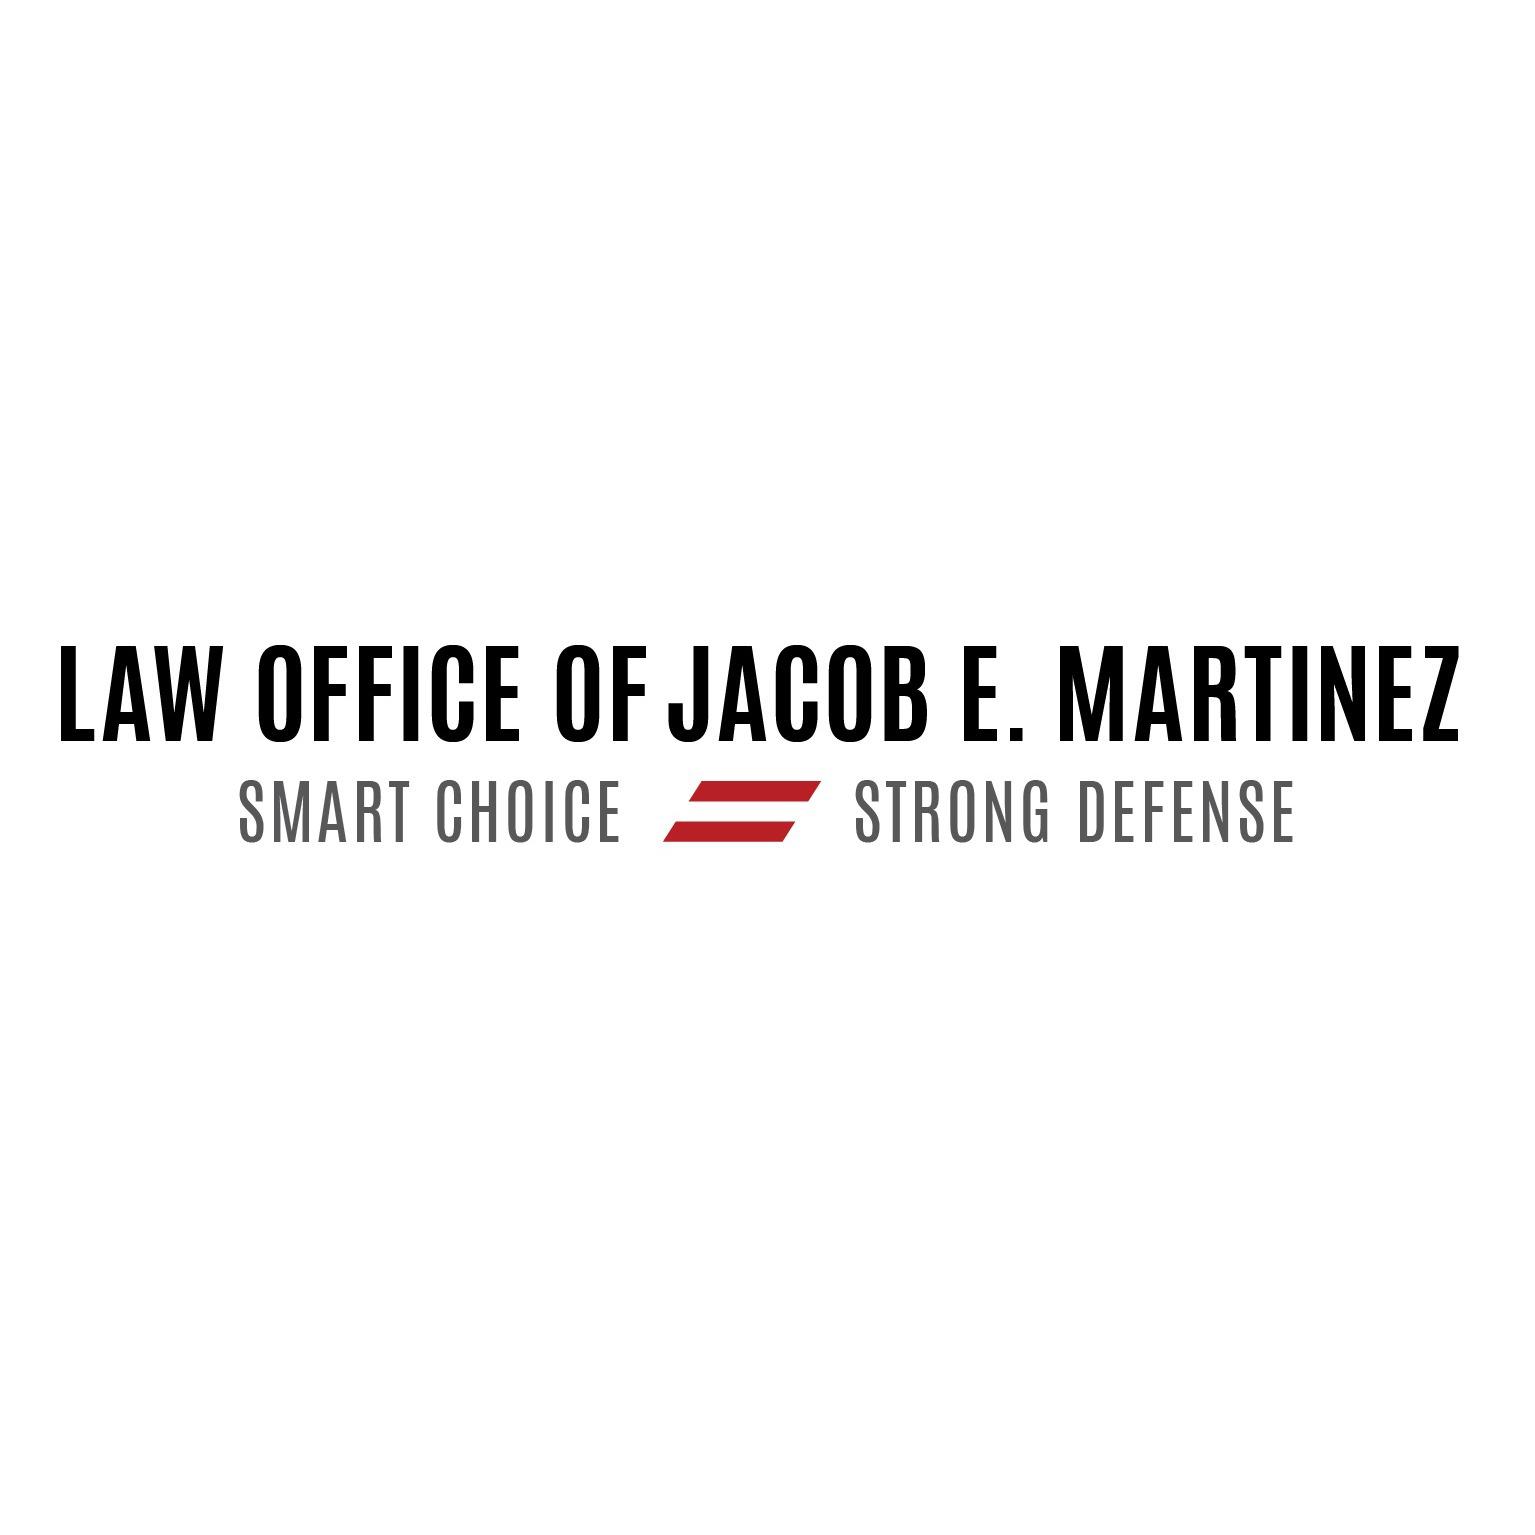 The Law Office of Jacob E. Martinez